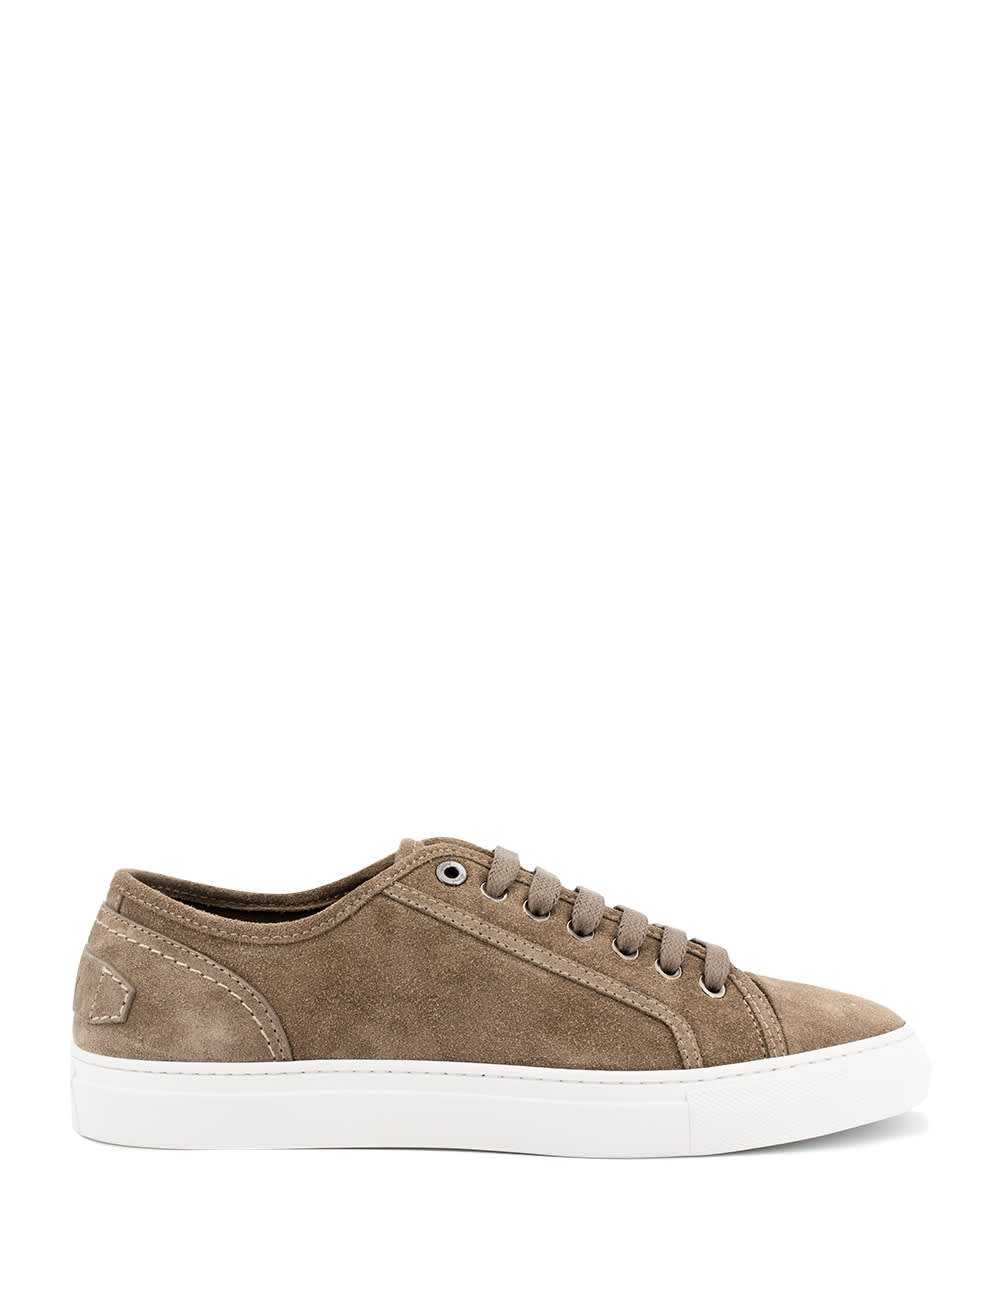 Brioni Sneakers In Sand